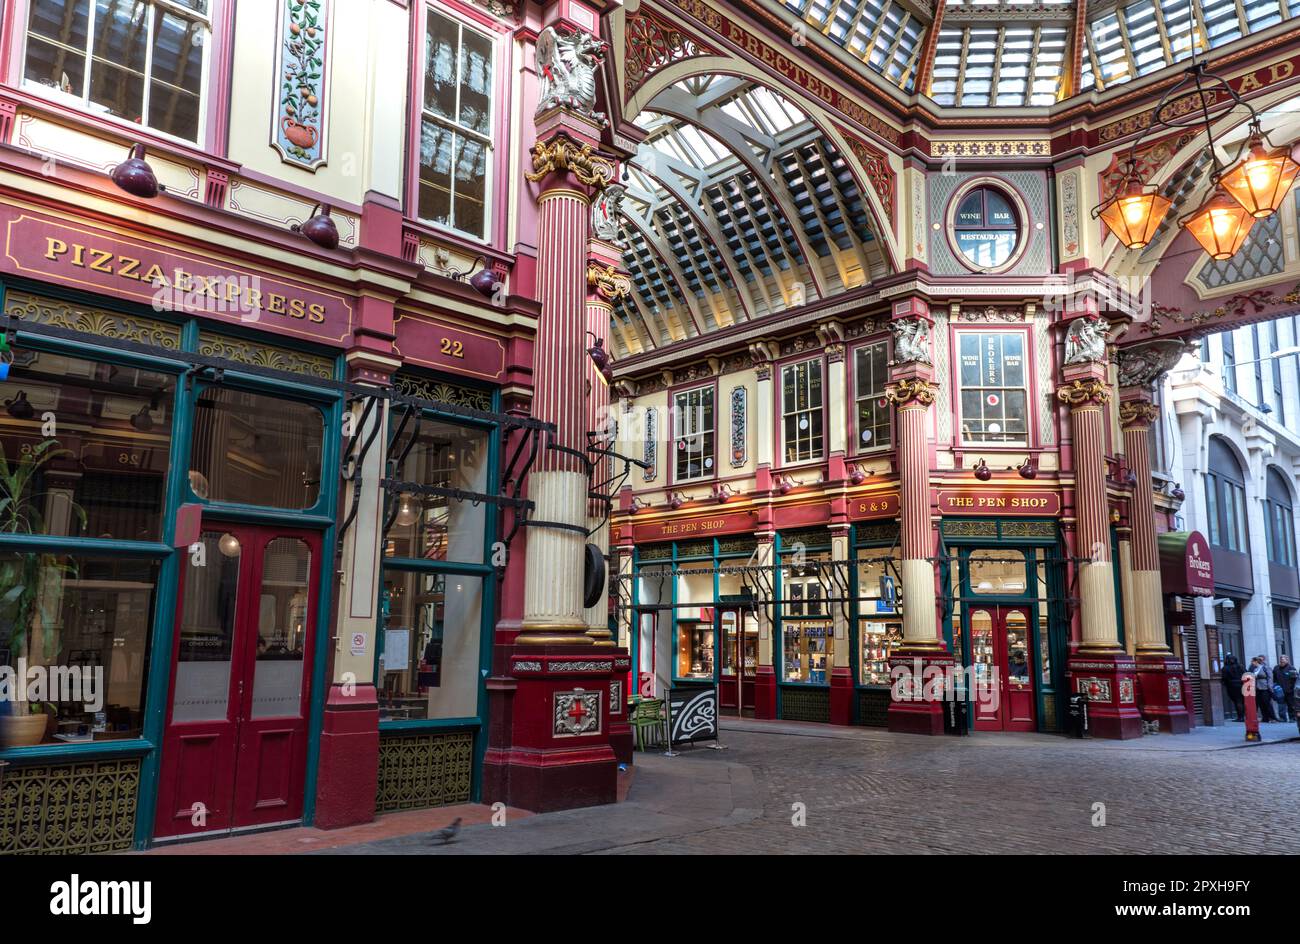 Shops, cafes, restaurants in 14th century Leadenhall market with ornate ...